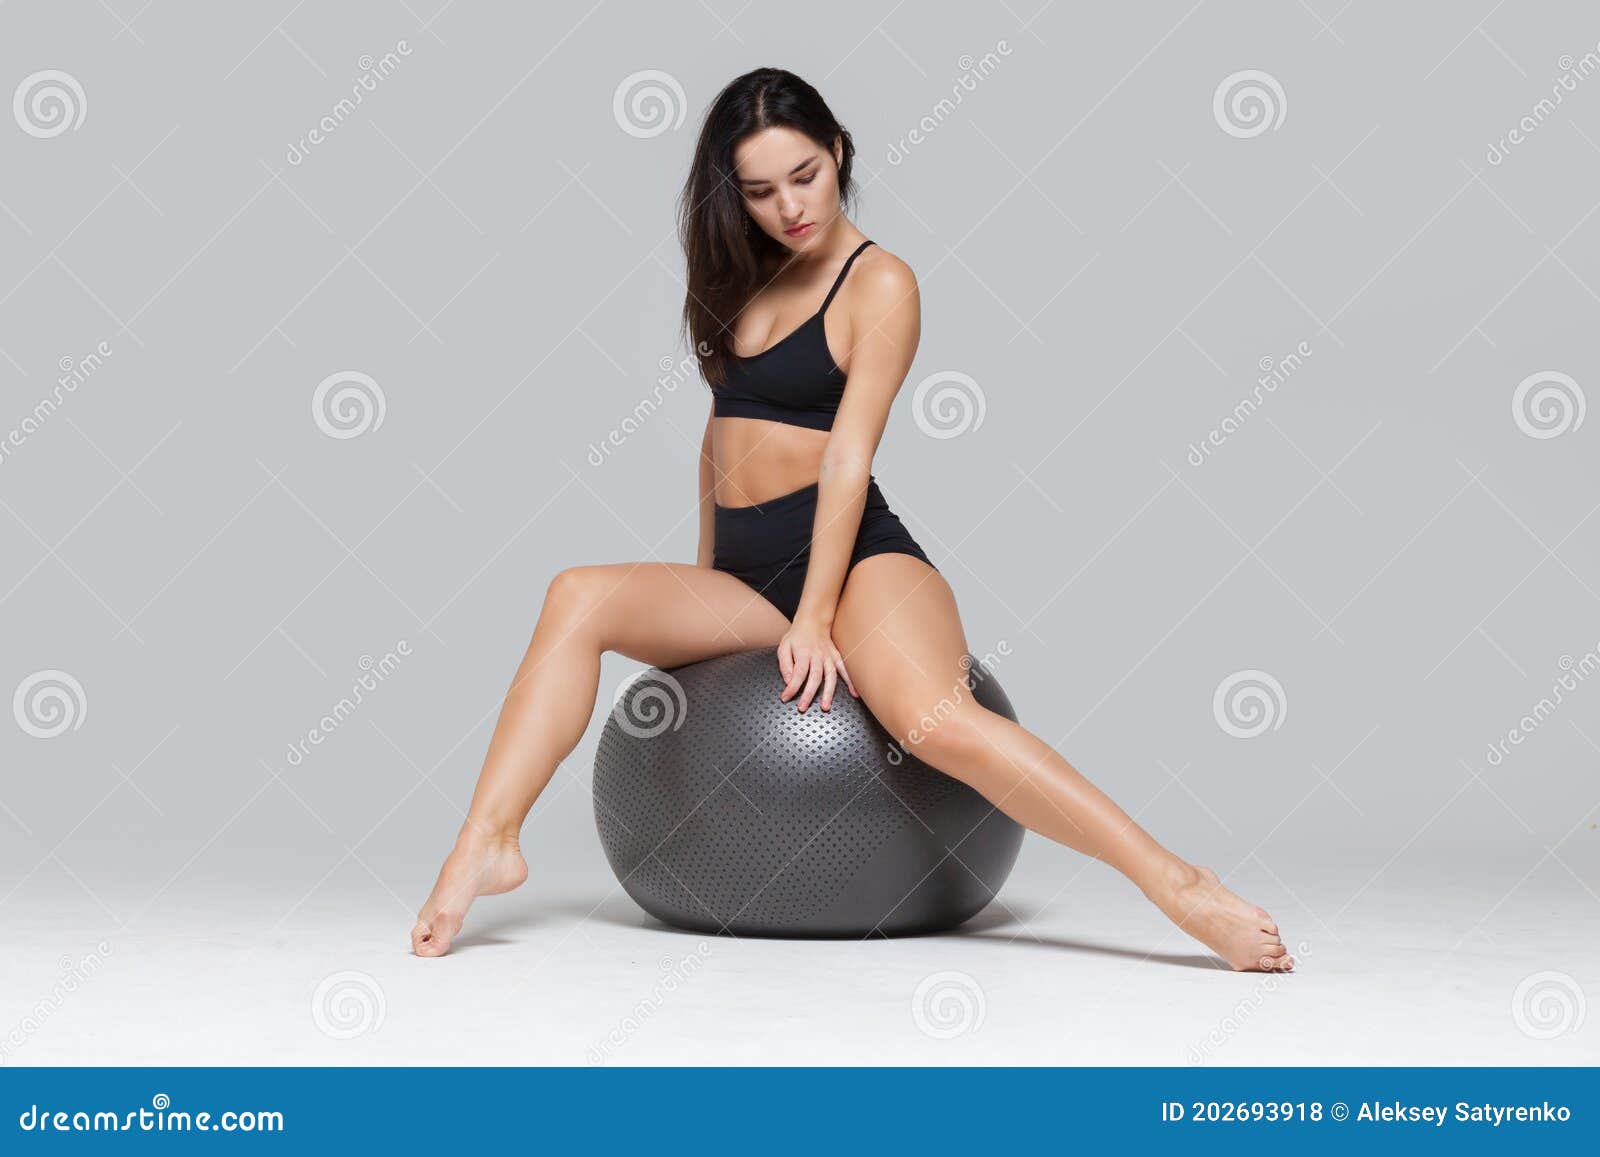 Ball stretching pictures